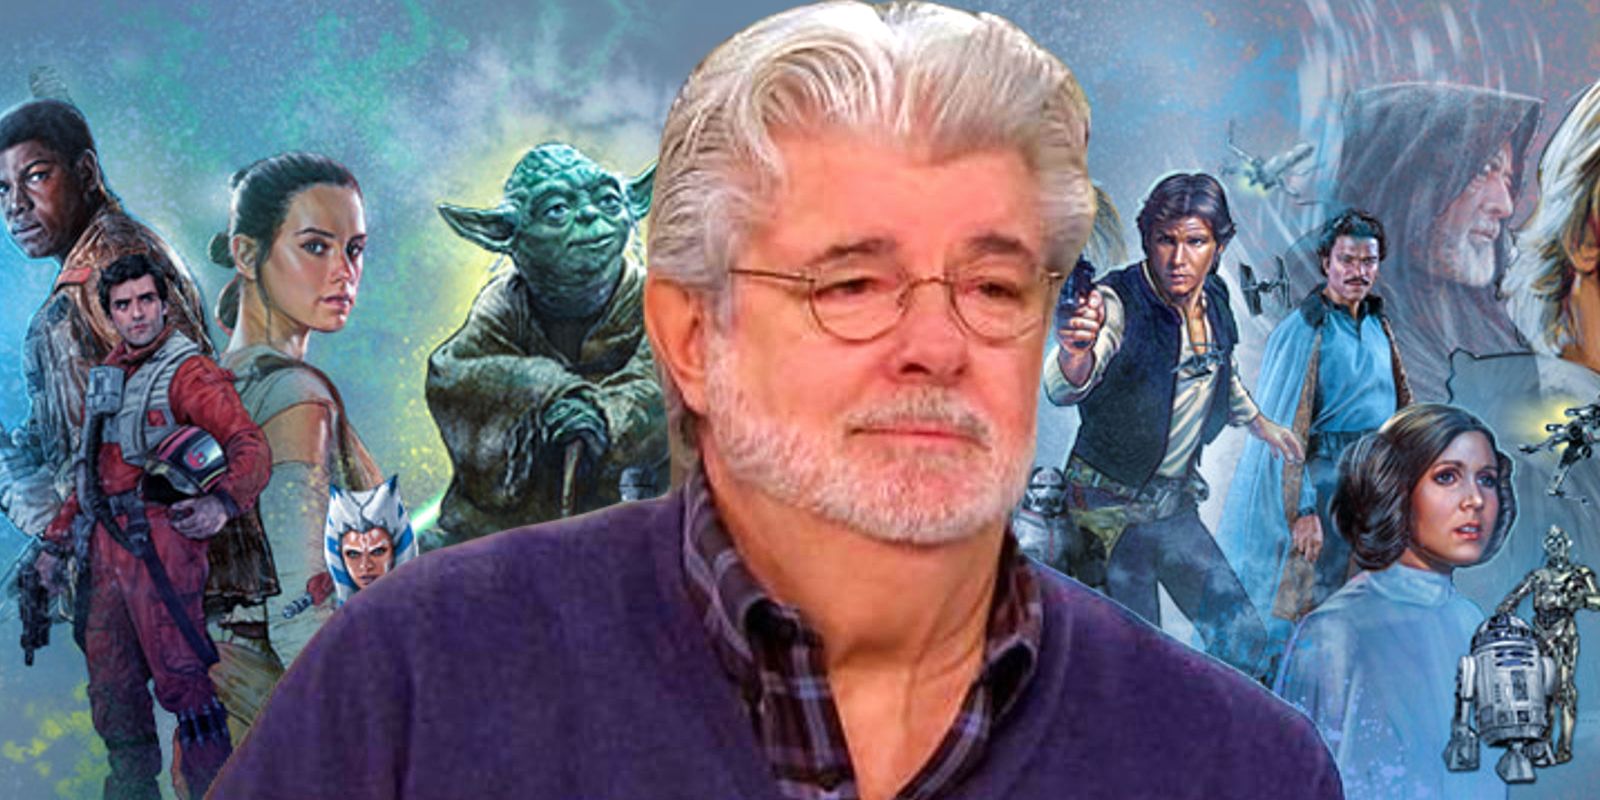 George Lucas in front of a Star Wars banner with various main characters from Star Wars